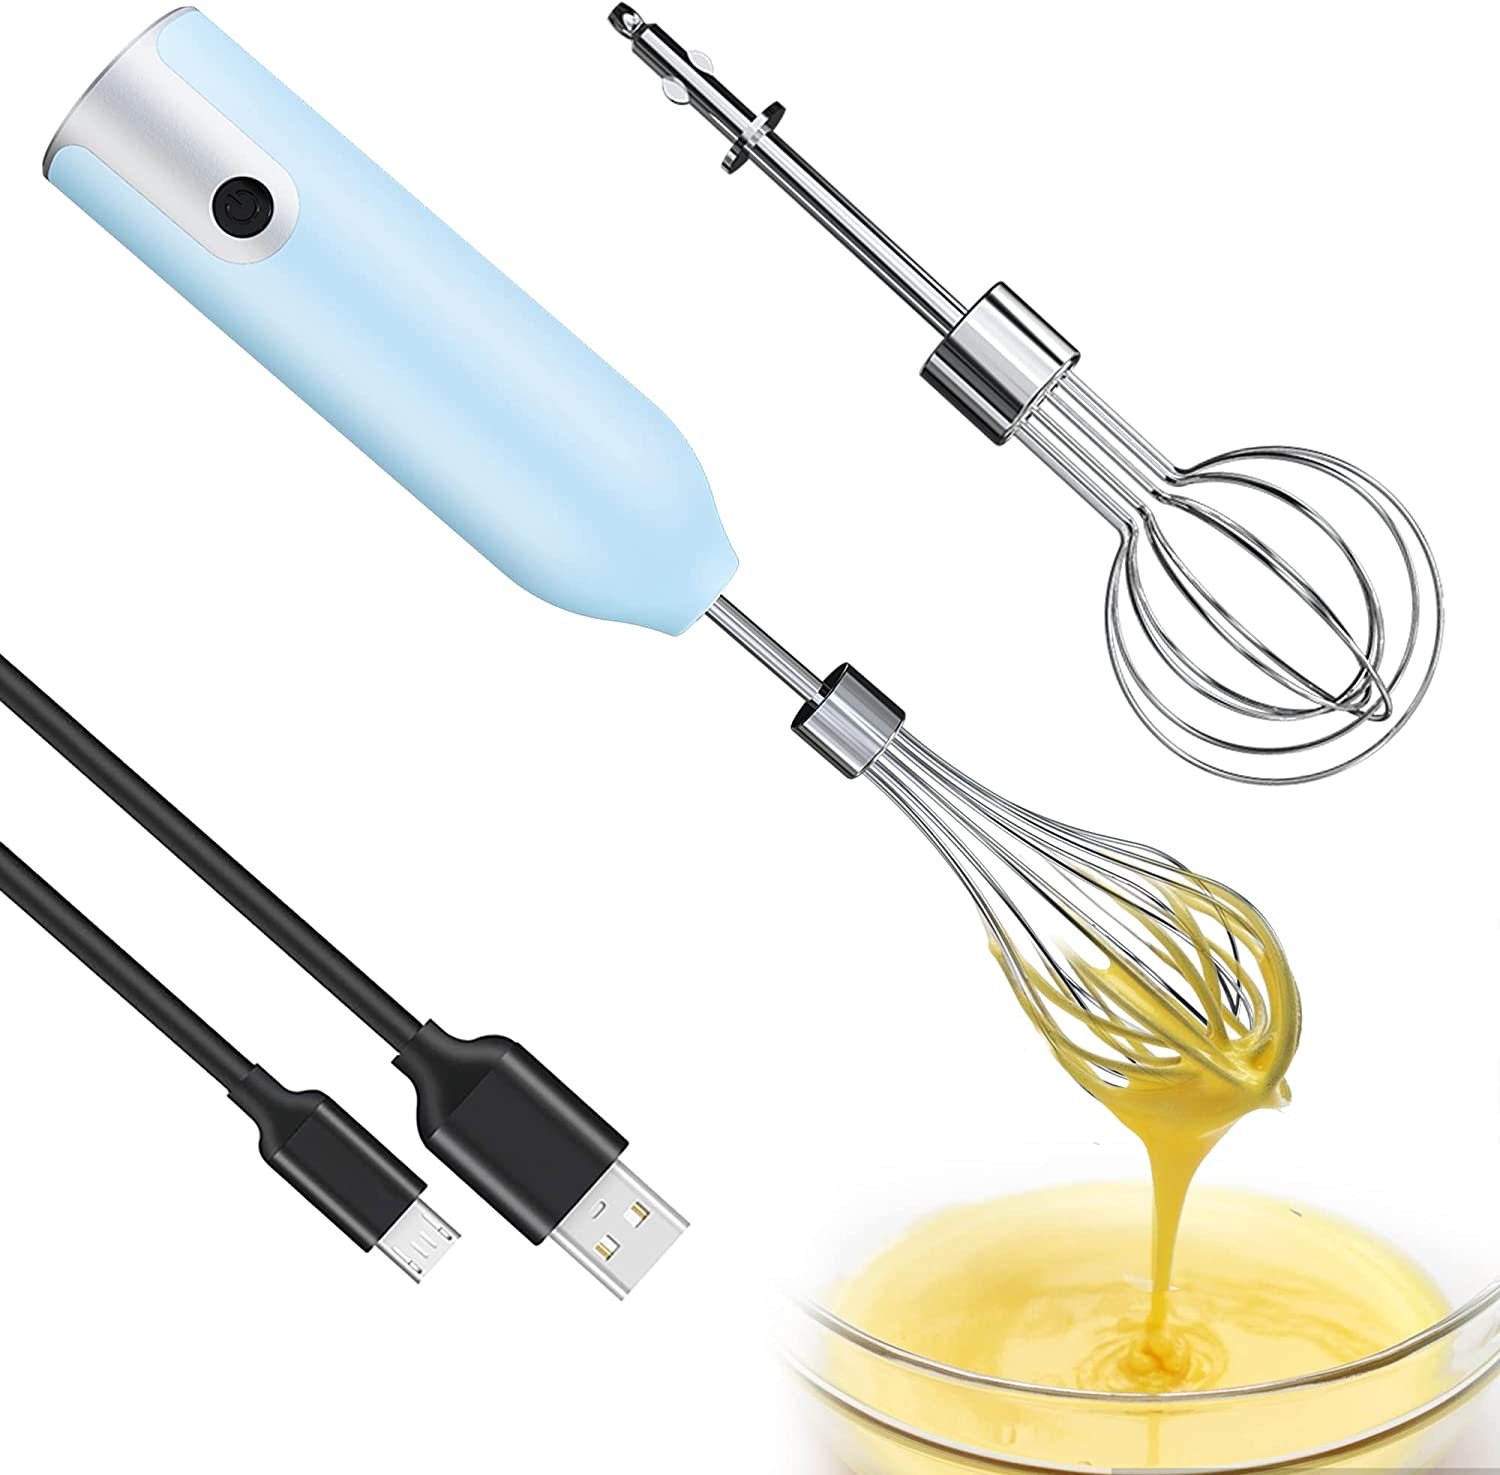 https://www.dontwasteyourmoney.com/wp-content/uploads/2023/04/vomelon-usb-rechargable-wireless-electric-egg-beater-electric-egg-beater.jpg